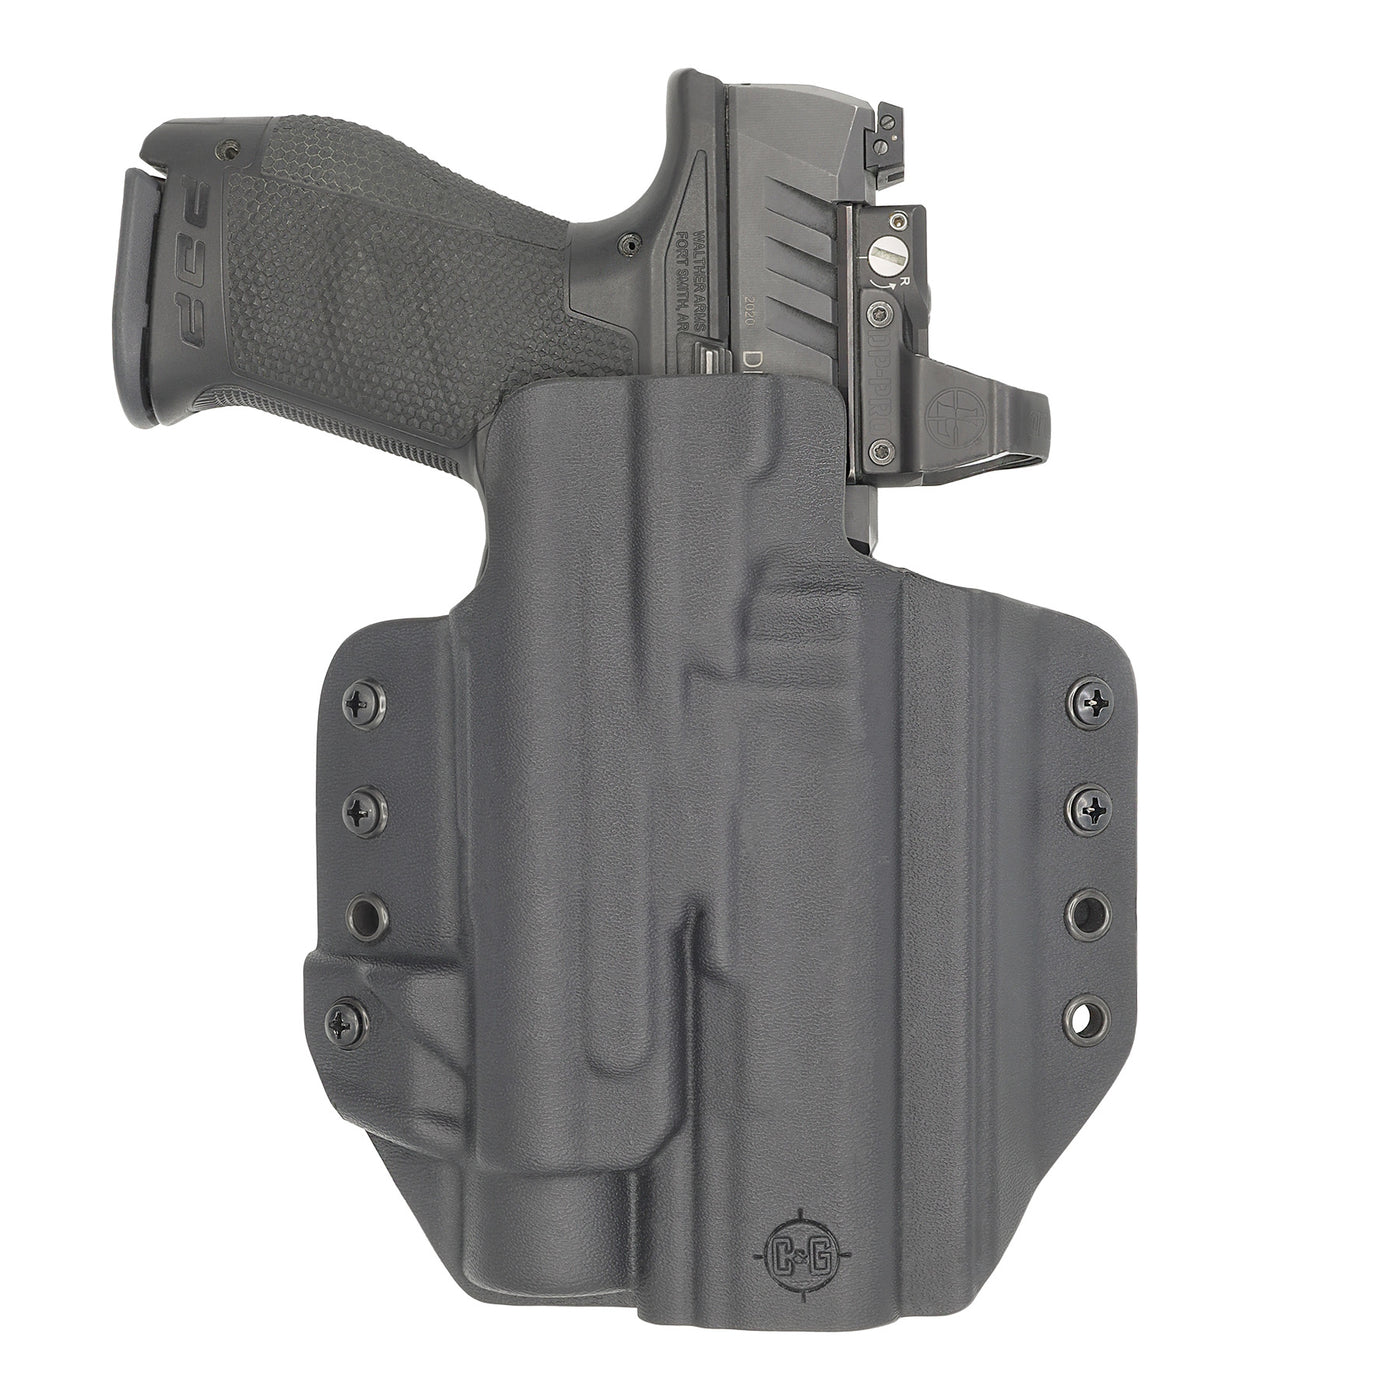 C&G Holsters quickship OWB Tactical CZ Shadow 2 Streamlight TLR1 in holstered position